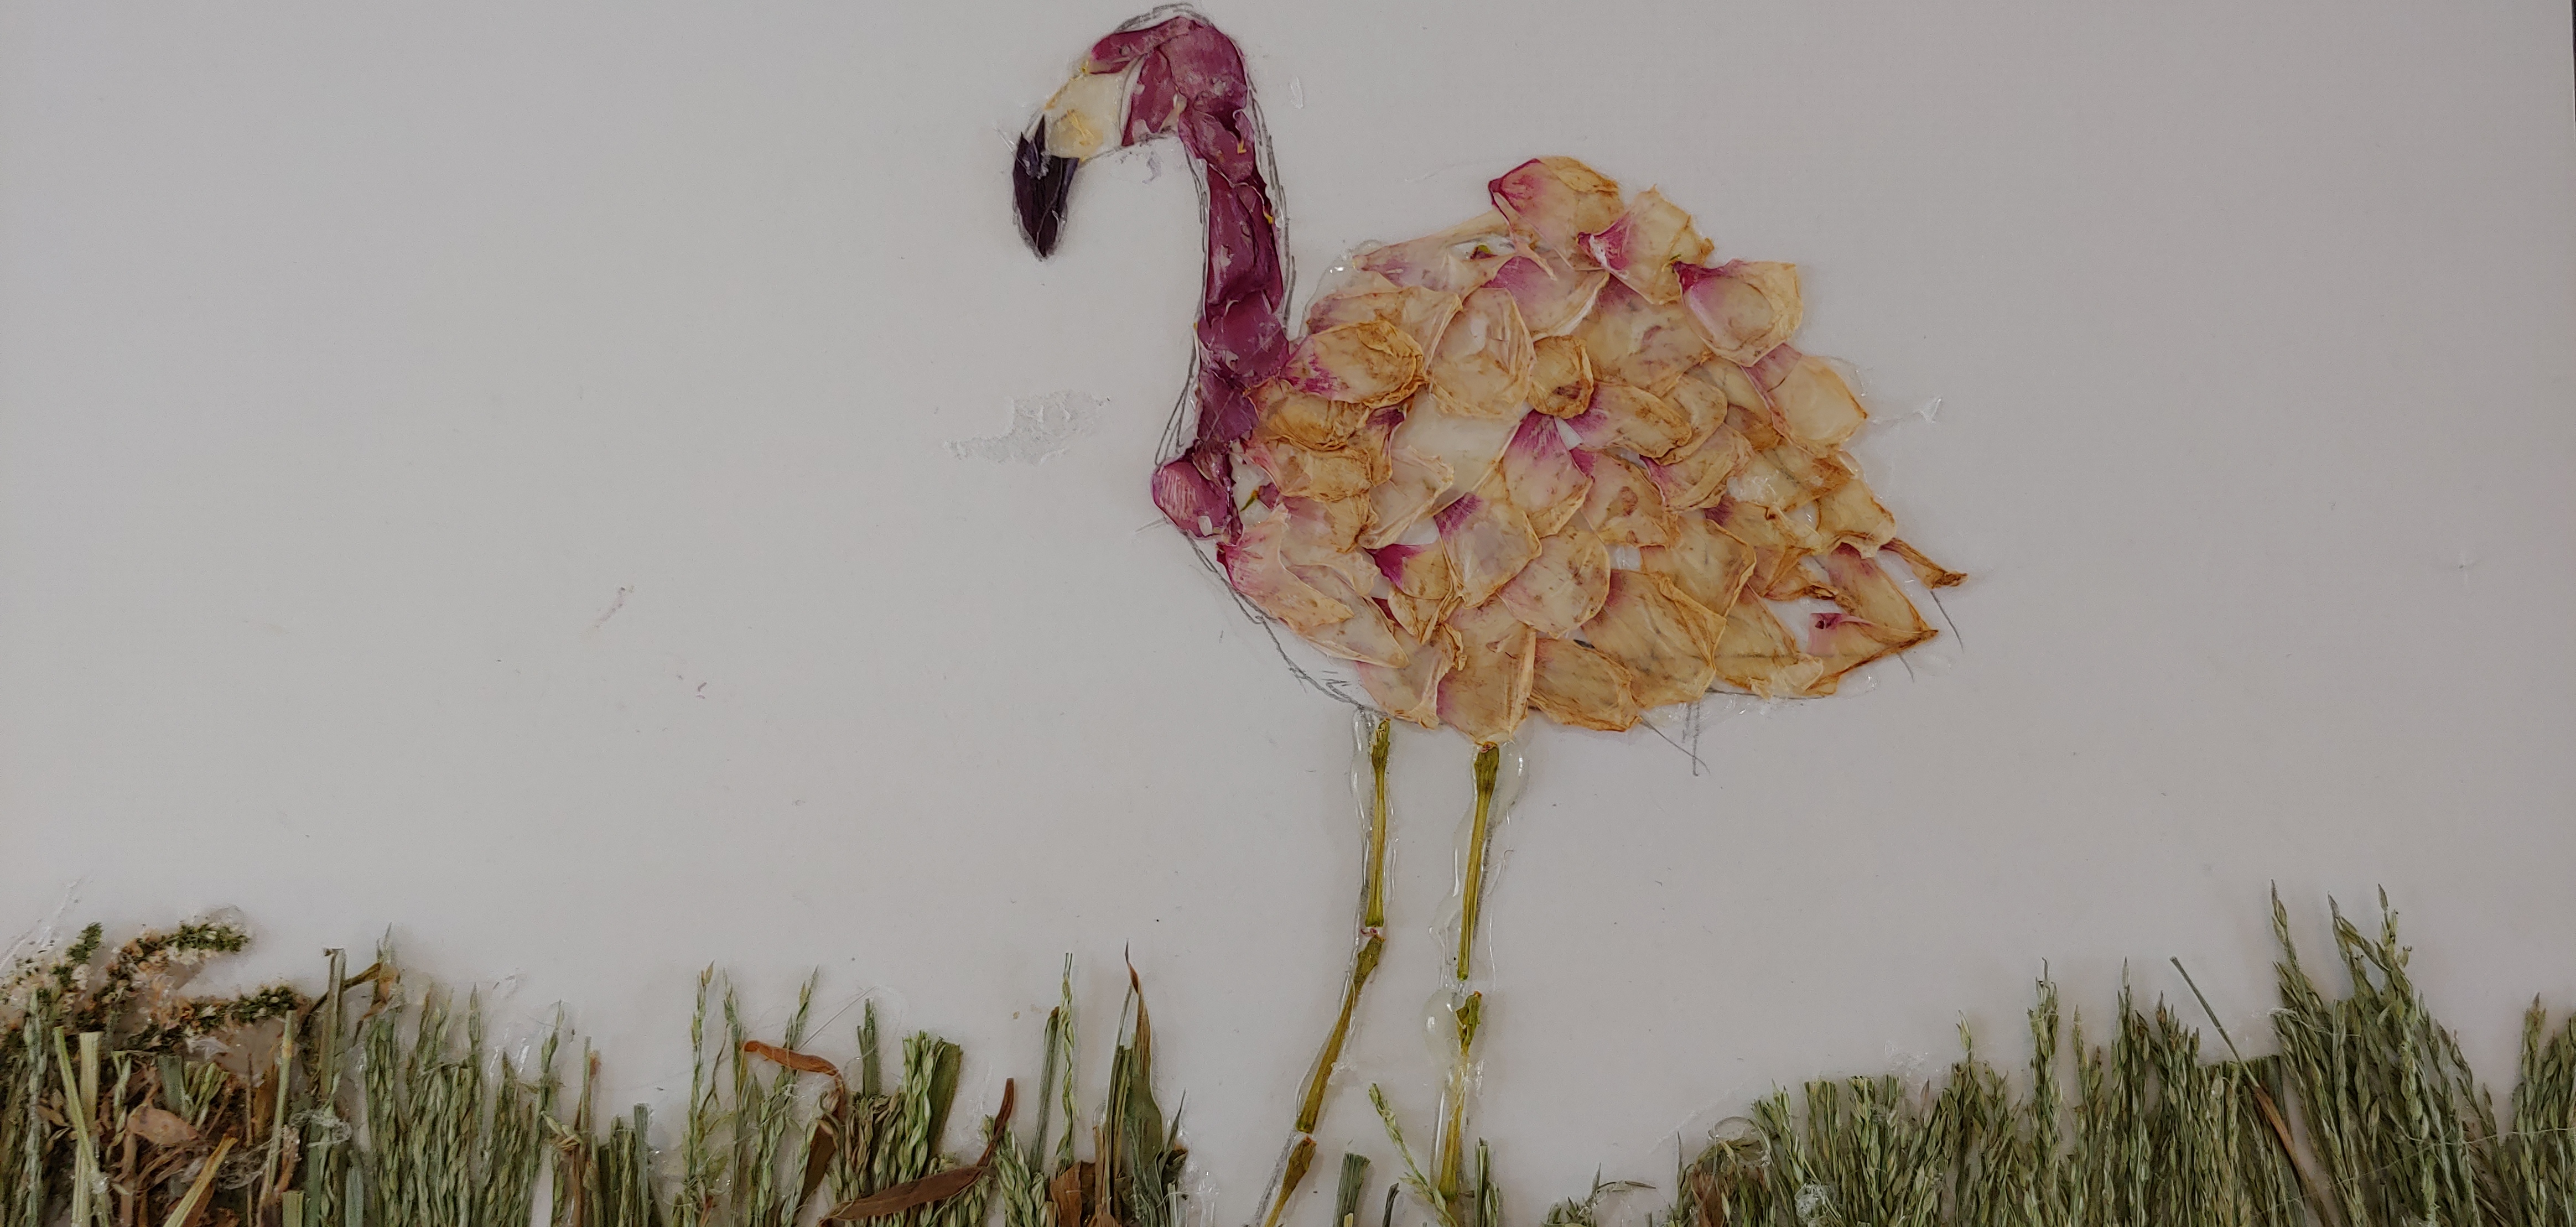 flamingo made of leaves, grass, and flowers